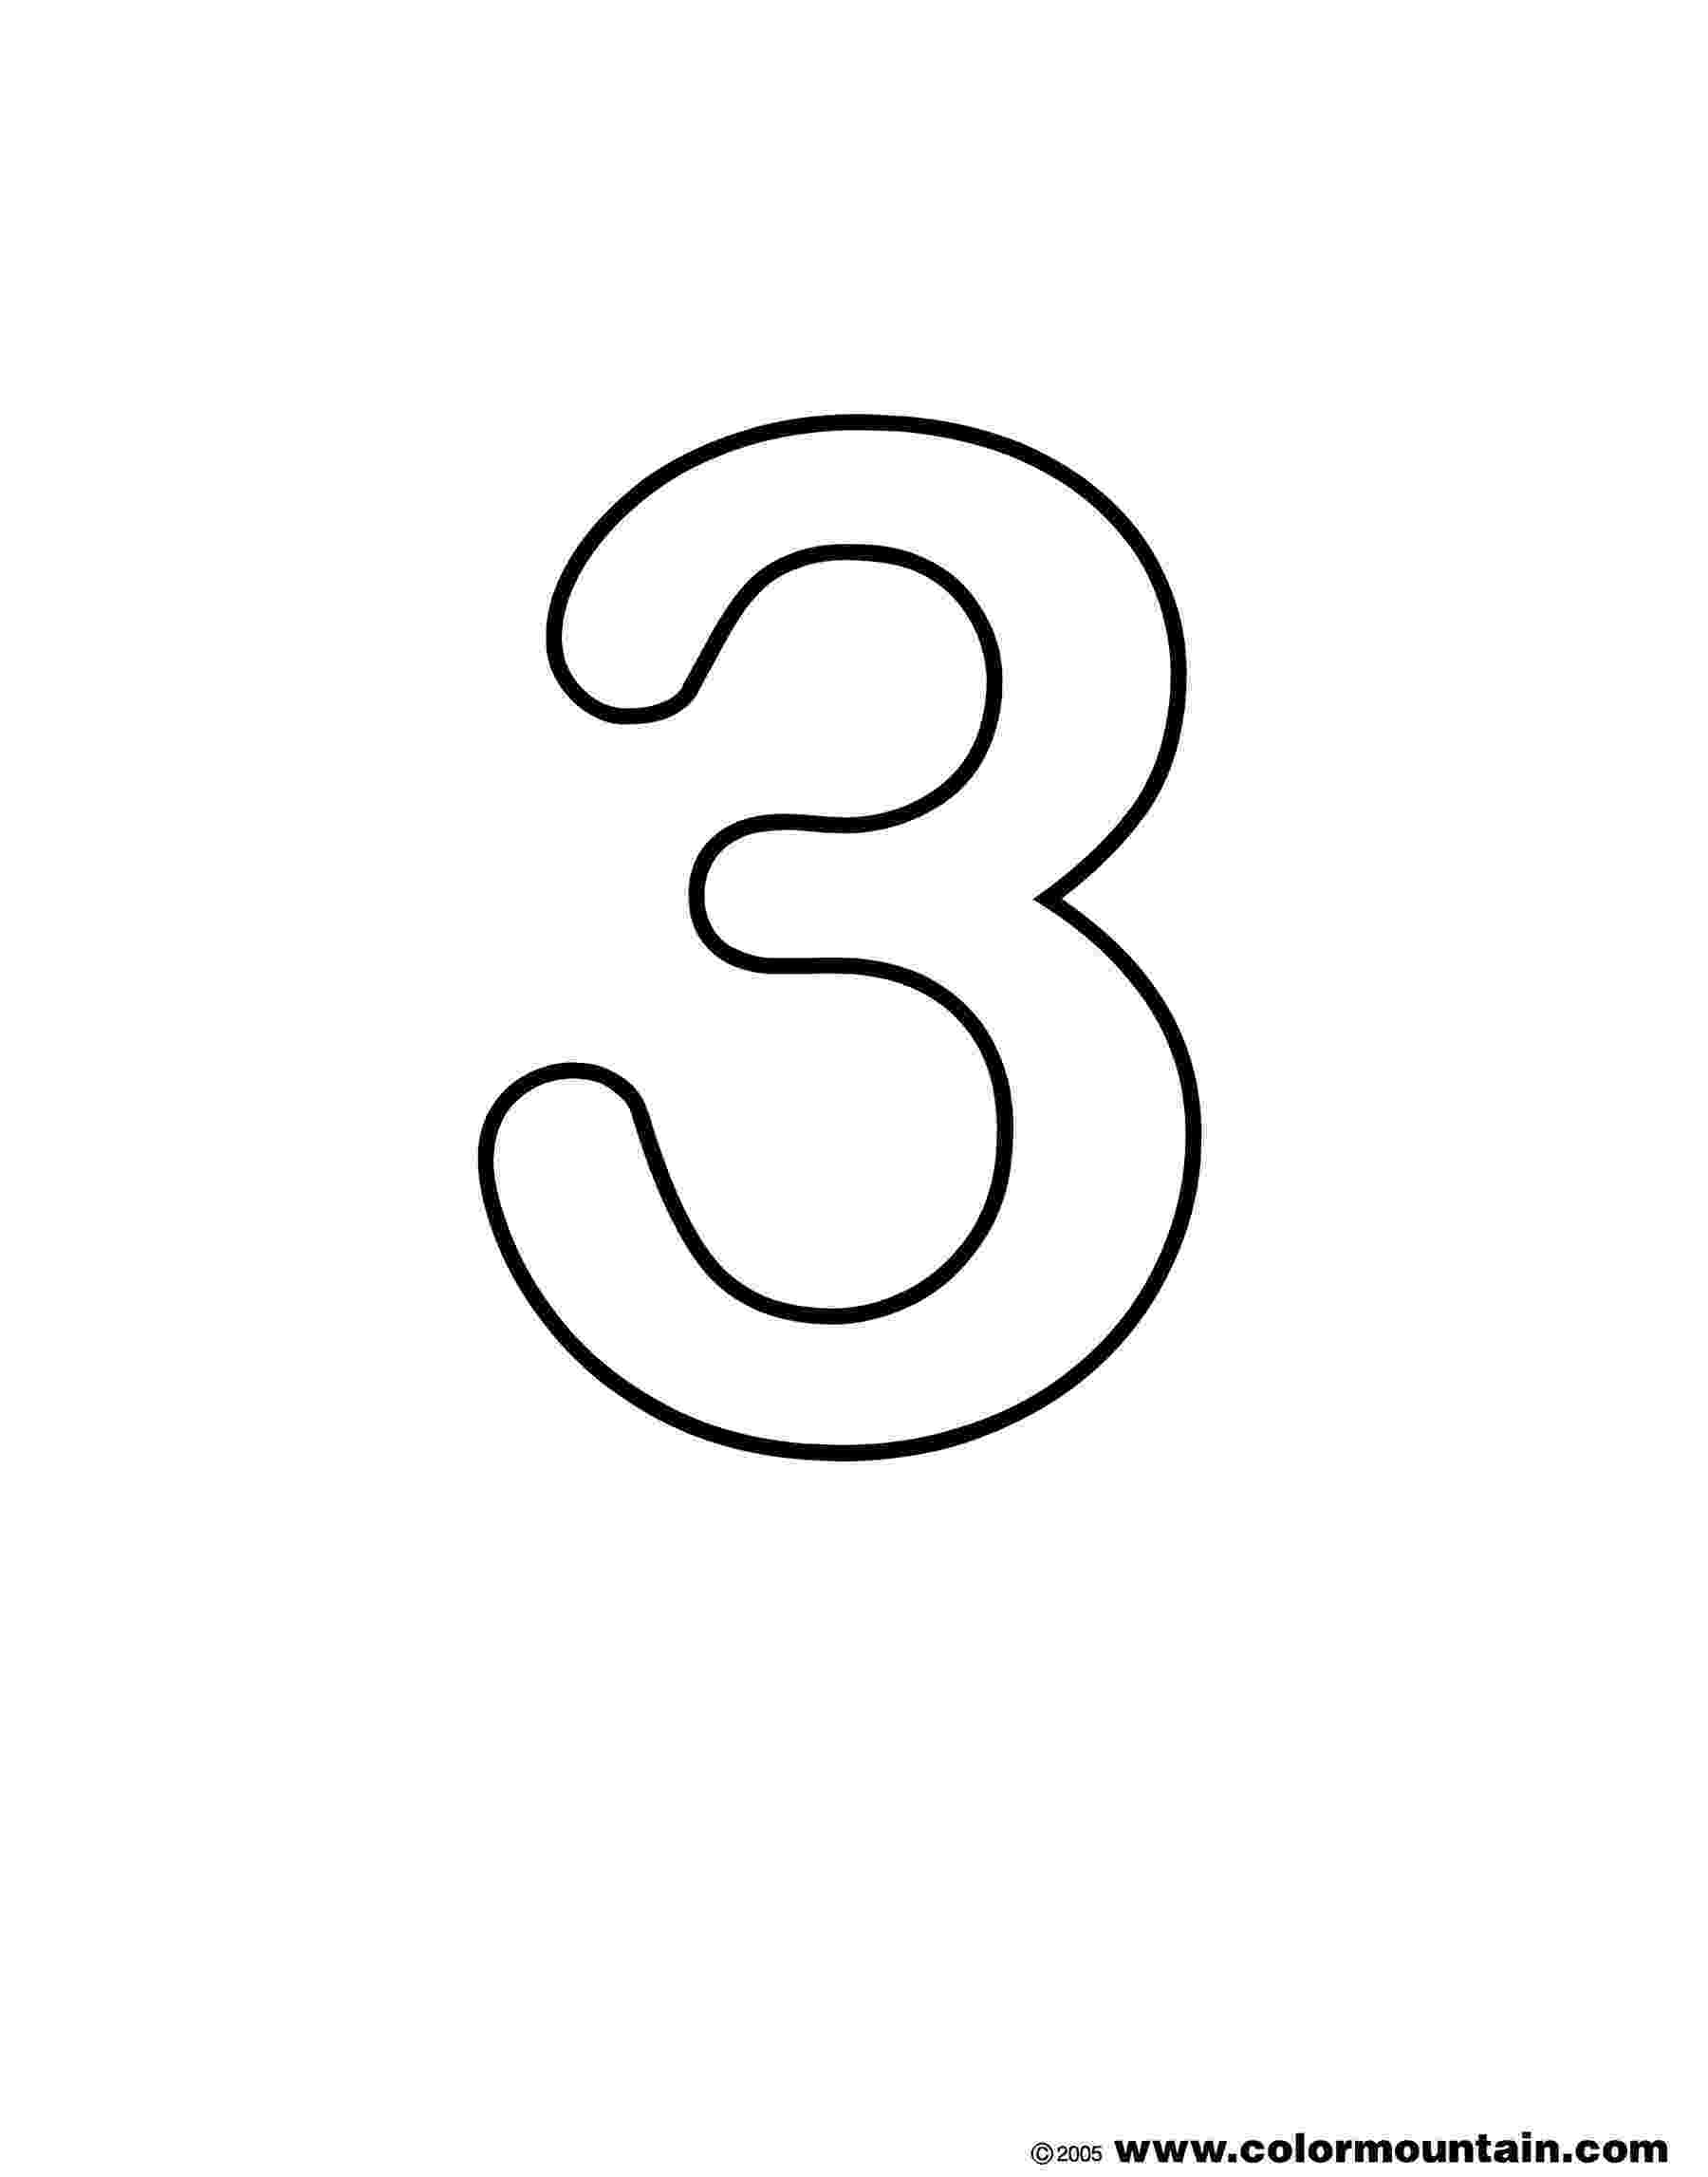 number 3 coloring page coloring pages numbers 3 quotthreequot page number coloring 3 